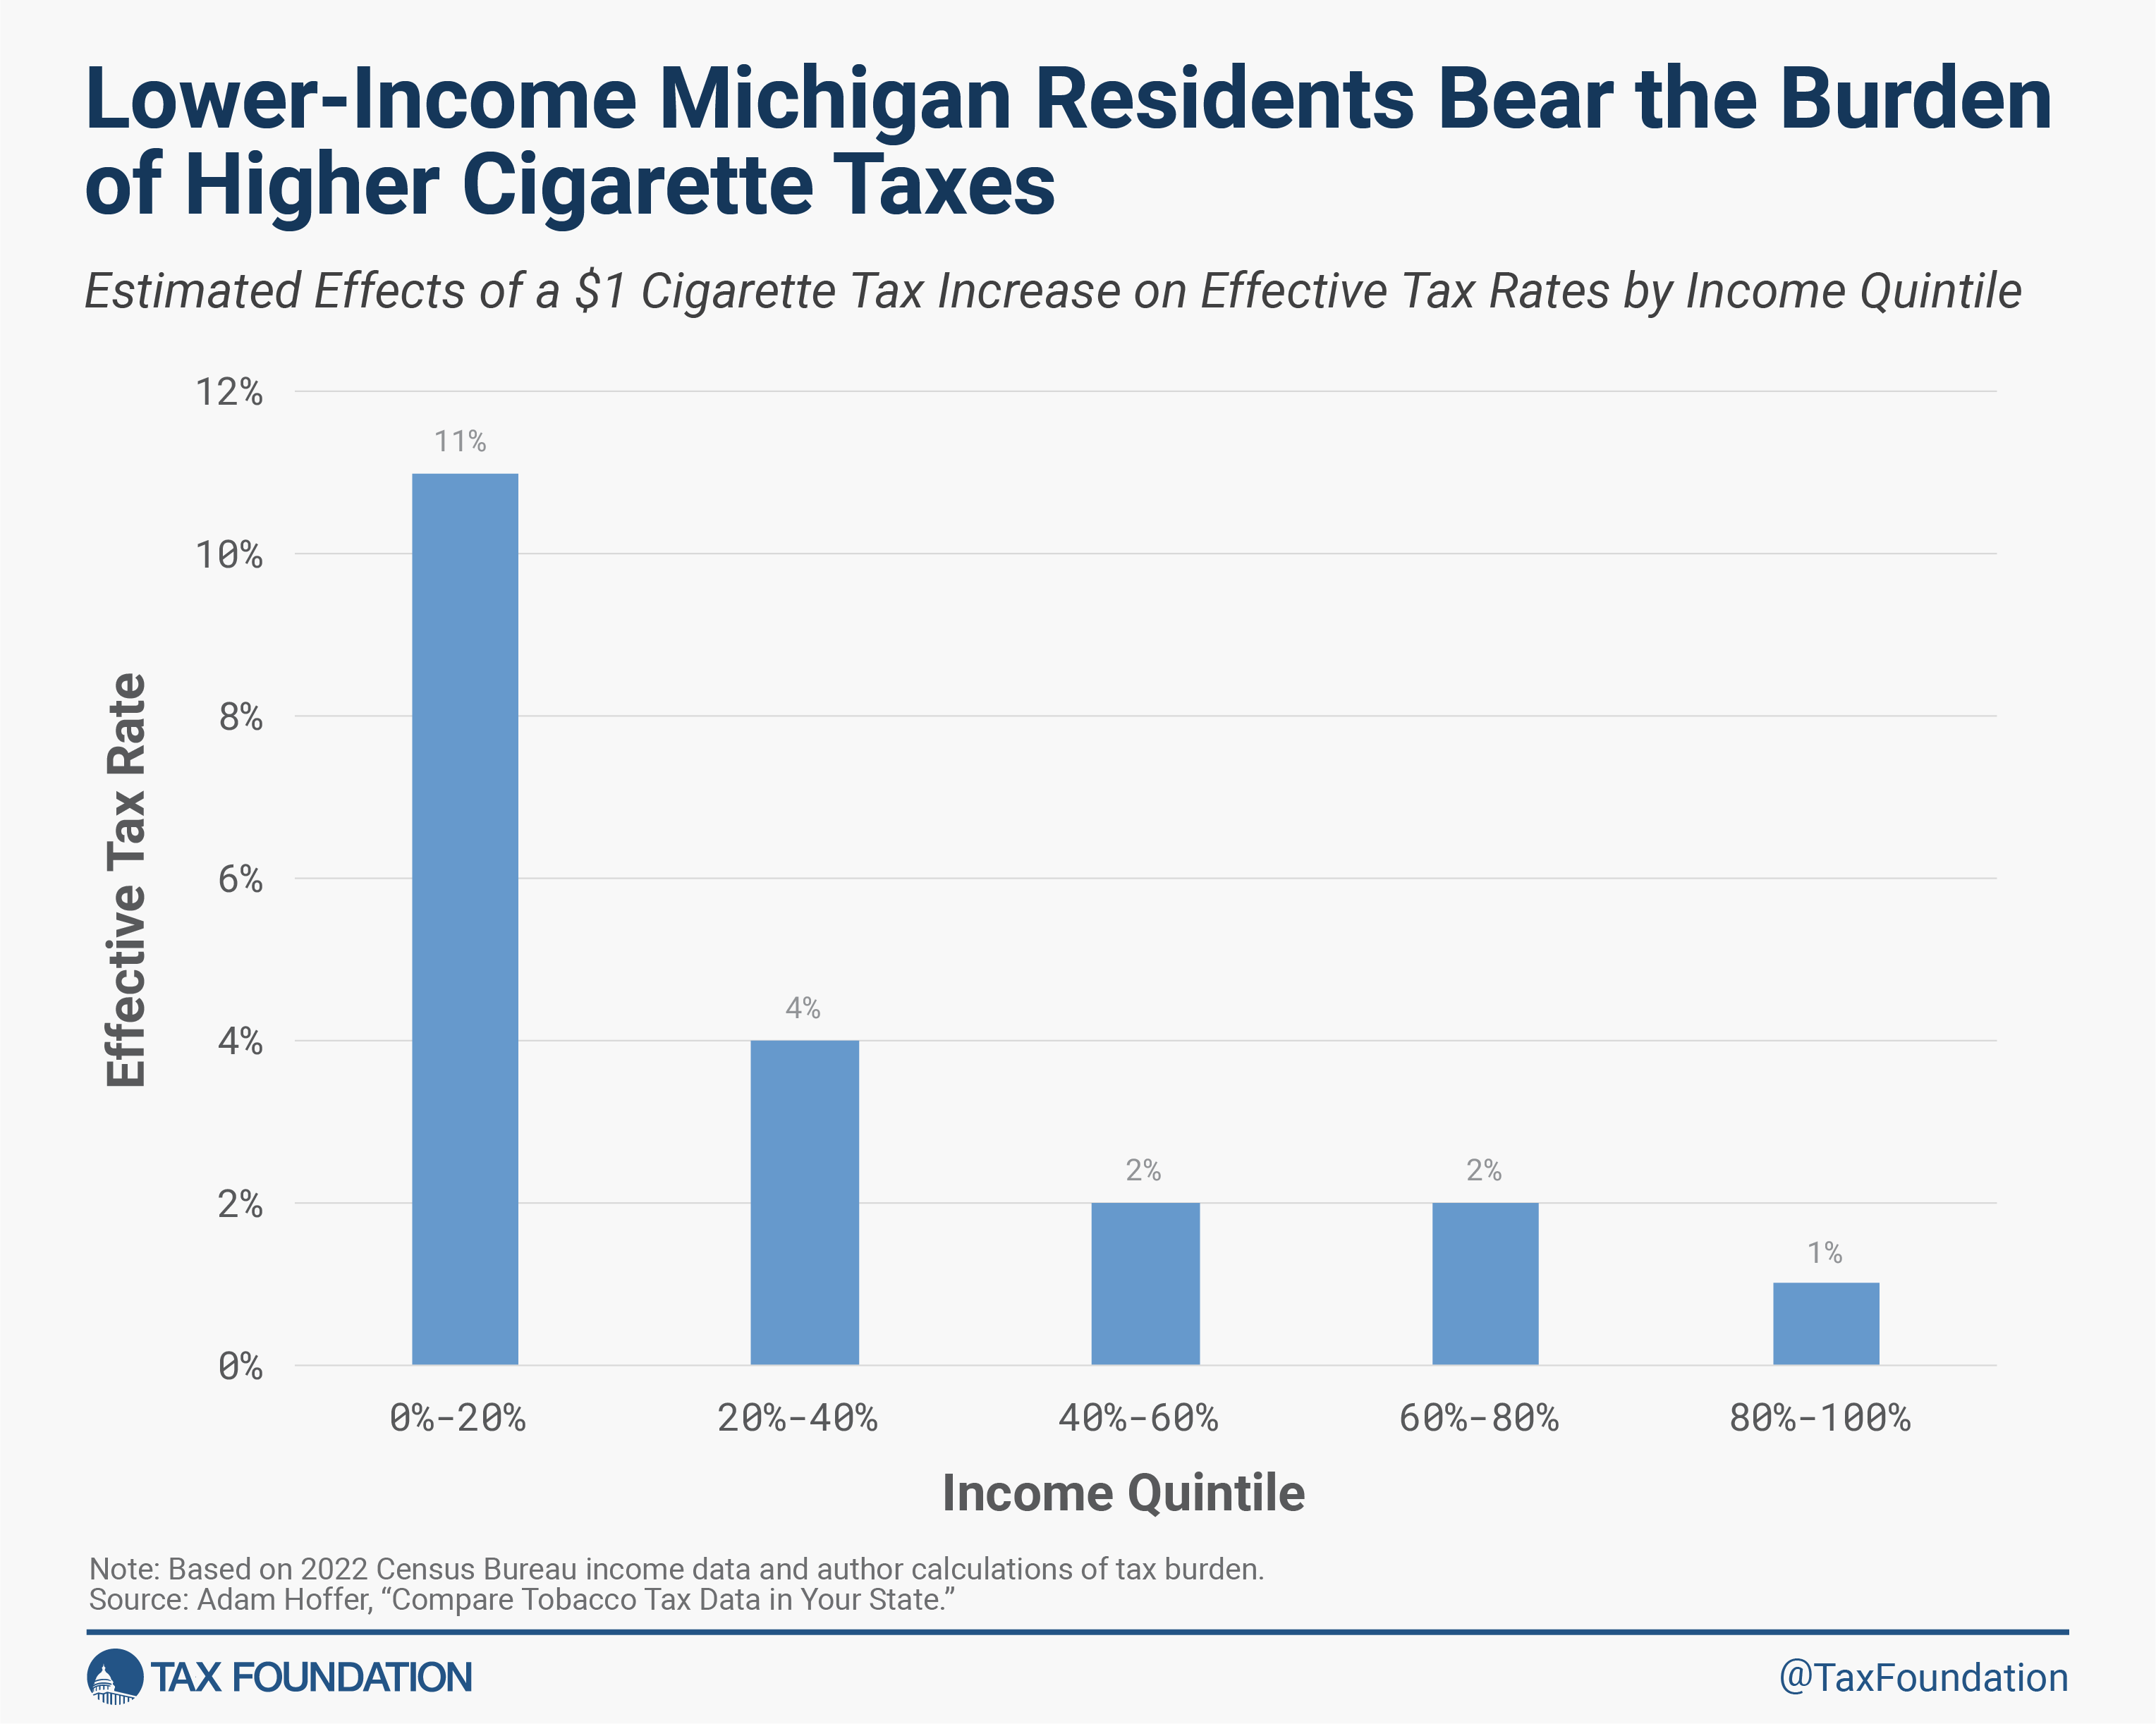 Lower income Michigan residents bear the highest burden of cigarette taxes